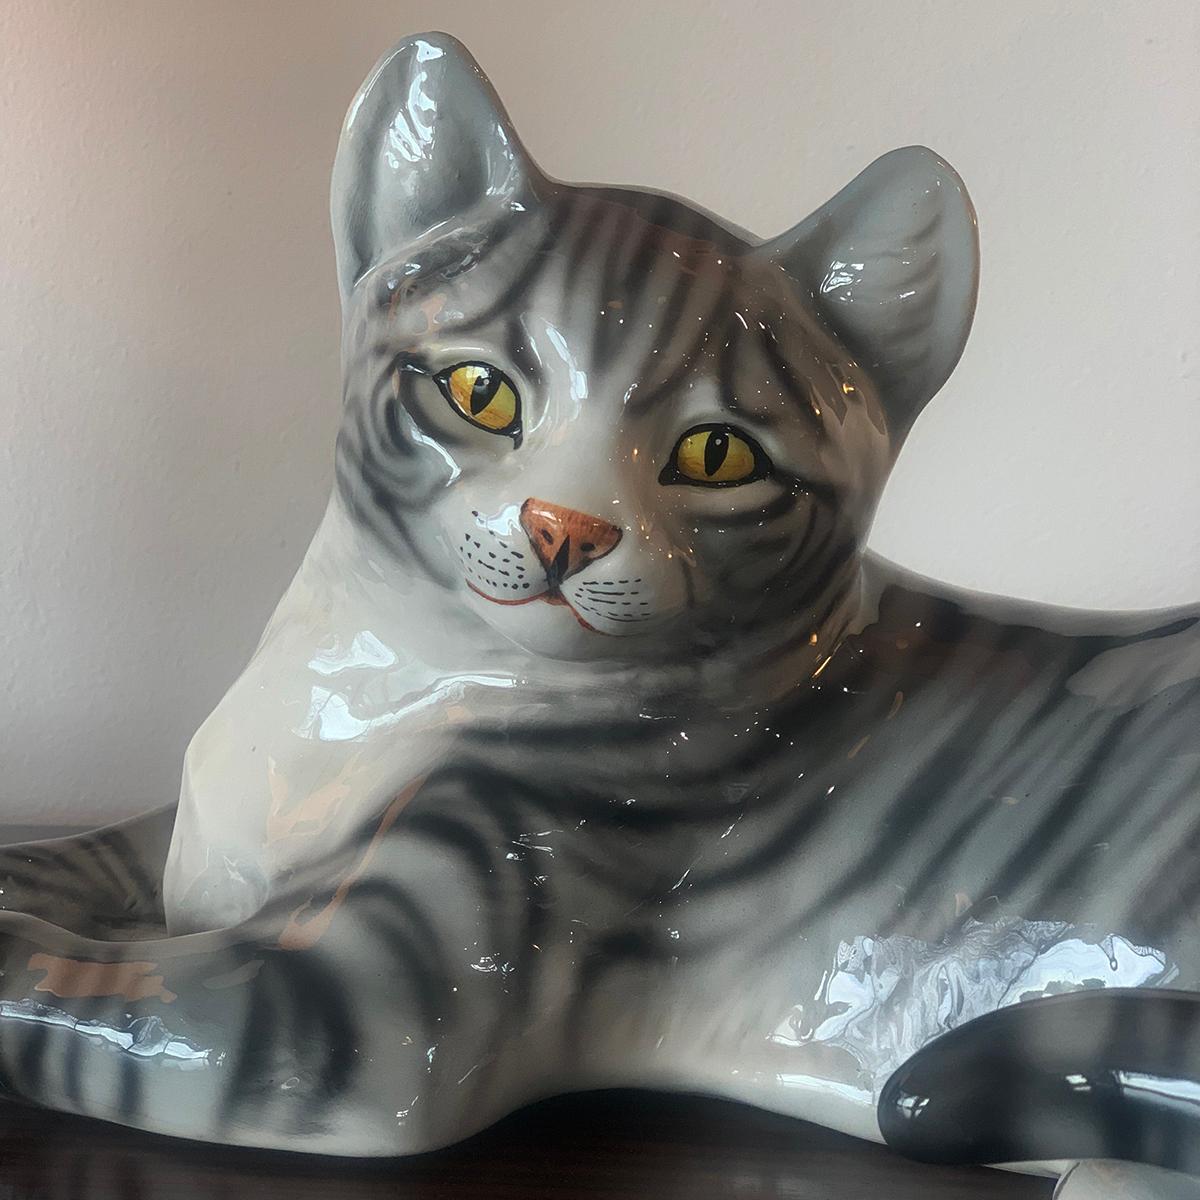 A large lifelike midcentury model of a striped cat, by Ronzan, Italy. There is no damage or repairs. In original condition, this is a very lifelike representation of a cat from Ronzan a master modeller of animals, Italy, circa 1950
Dimensions are